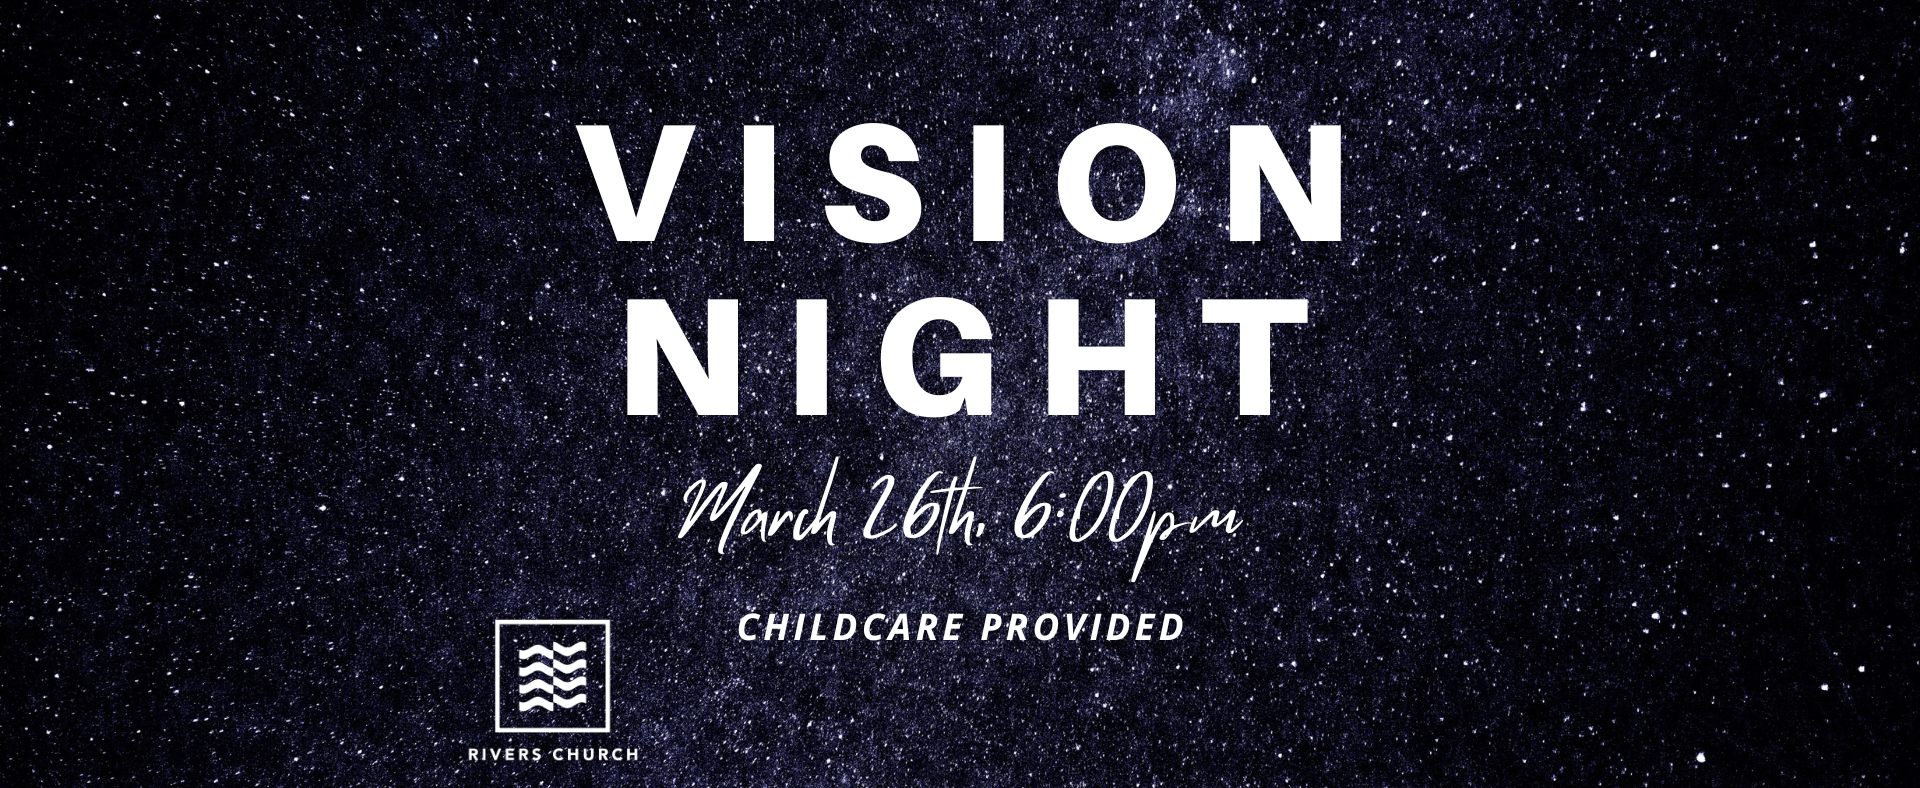 Vision Night - March 26th, 6:00pm